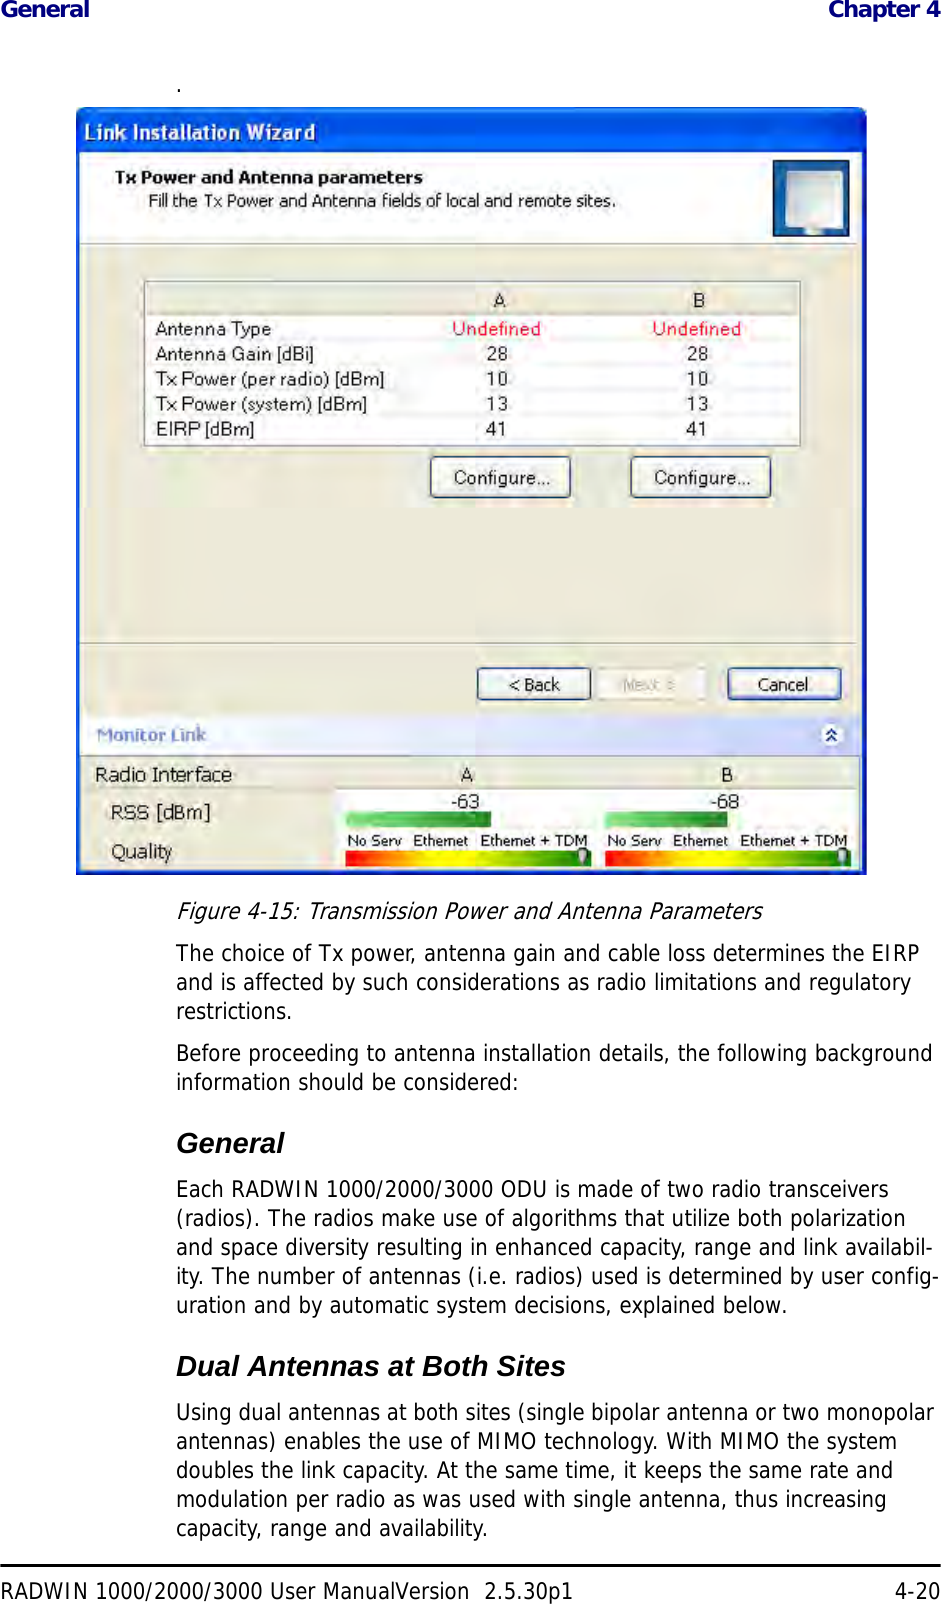 General  Chapter 4RADWIN 1000/2000/3000 User ManualVersion  2.5.30p1 4-20.Figure 4-15: Transmission Power and Antenna ParametersThe choice of Tx power, antenna gain and cable loss determines the EIRP and is affected by such considerations as radio limitations and regulatory restrictions.Before proceeding to antenna installation details, the following background information should be considered:GeneralEach RADWIN 1000/2000/3000 ODU is made of two radio transceivers (radios). The radios make use of algorithms that utilize both polarization and space diversity resulting in enhanced capacity, range and link availabil-ity. The number of antennas (i.e. radios) used is determined by user config-uration and by automatic system decisions, explained below. Dual Antennas at Both SitesUsing dual antennas at both sites (single bipolar antenna or two monopolar antennas) enables the use of MIMO technology. With MIMO the system doubles the link capacity. At the same time, it keeps the same rate and modulation per radio as was used with single antenna, thus increasing capacity, range and availability.